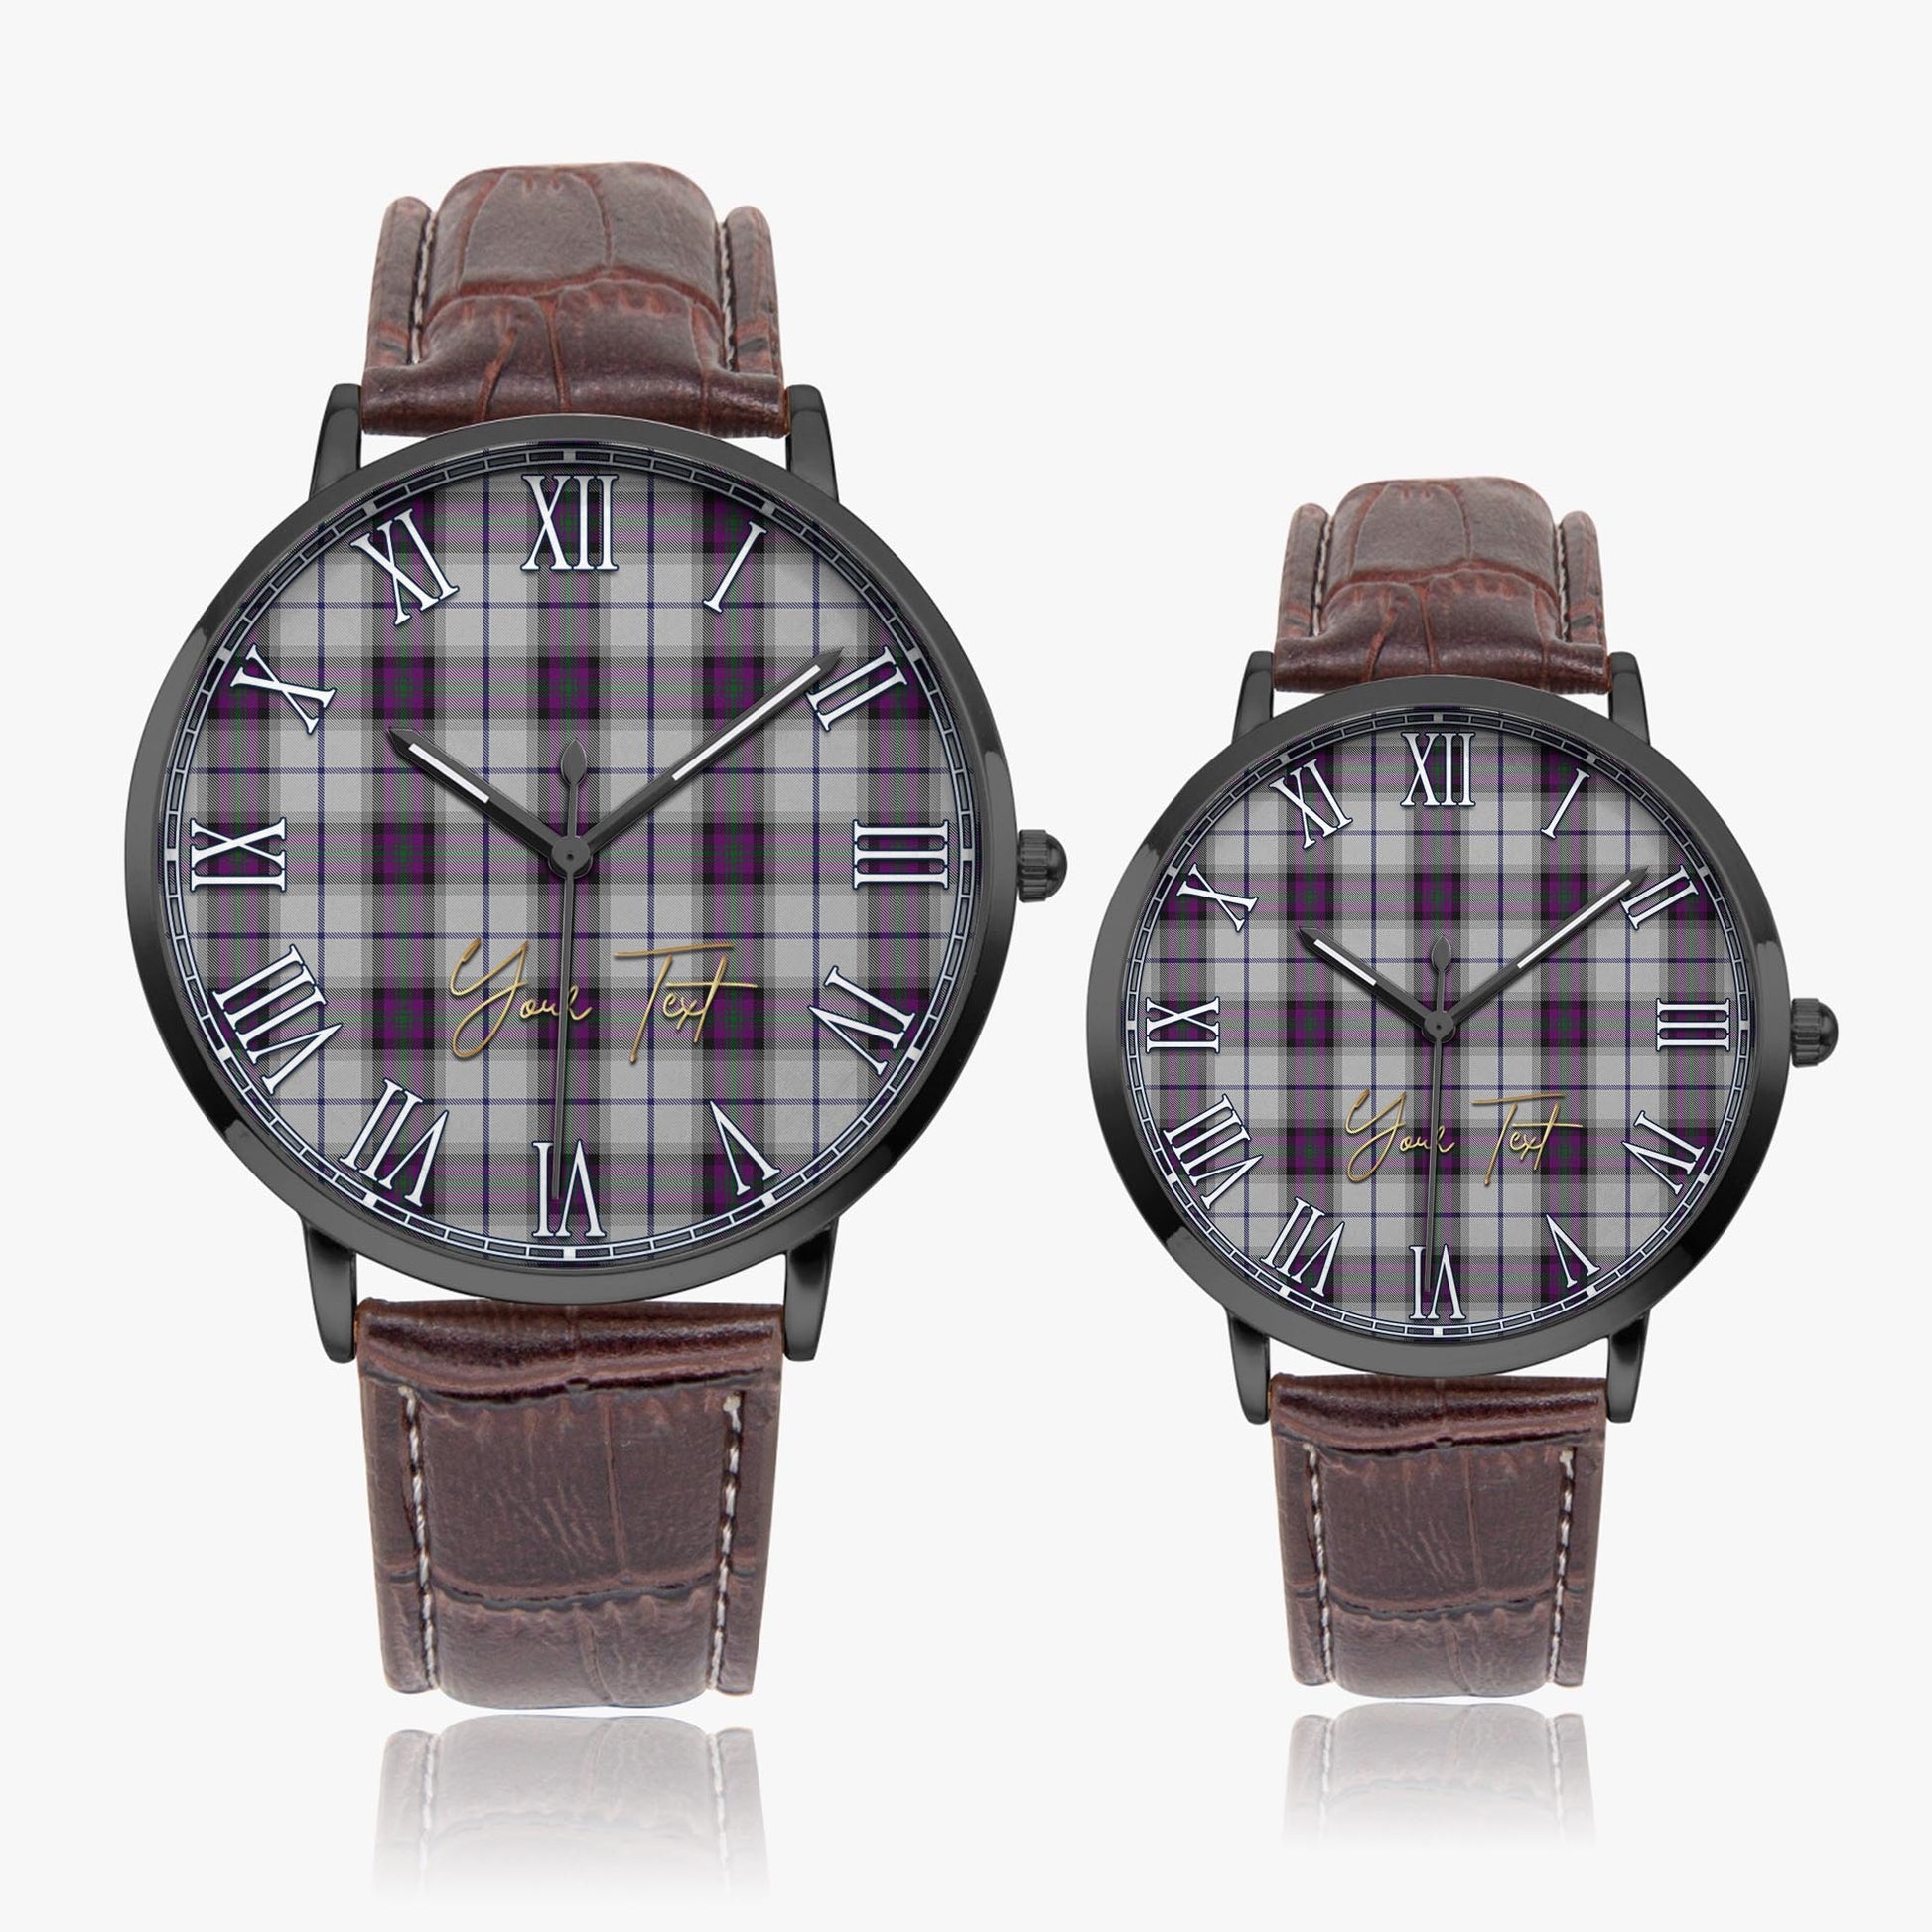 Alexander of Menstry Dress Tartan Personalized Your Text Leather Trap Quartz Watch Ultra Thin Black Case With Brown Leather Strap - Tartanvibesclothing